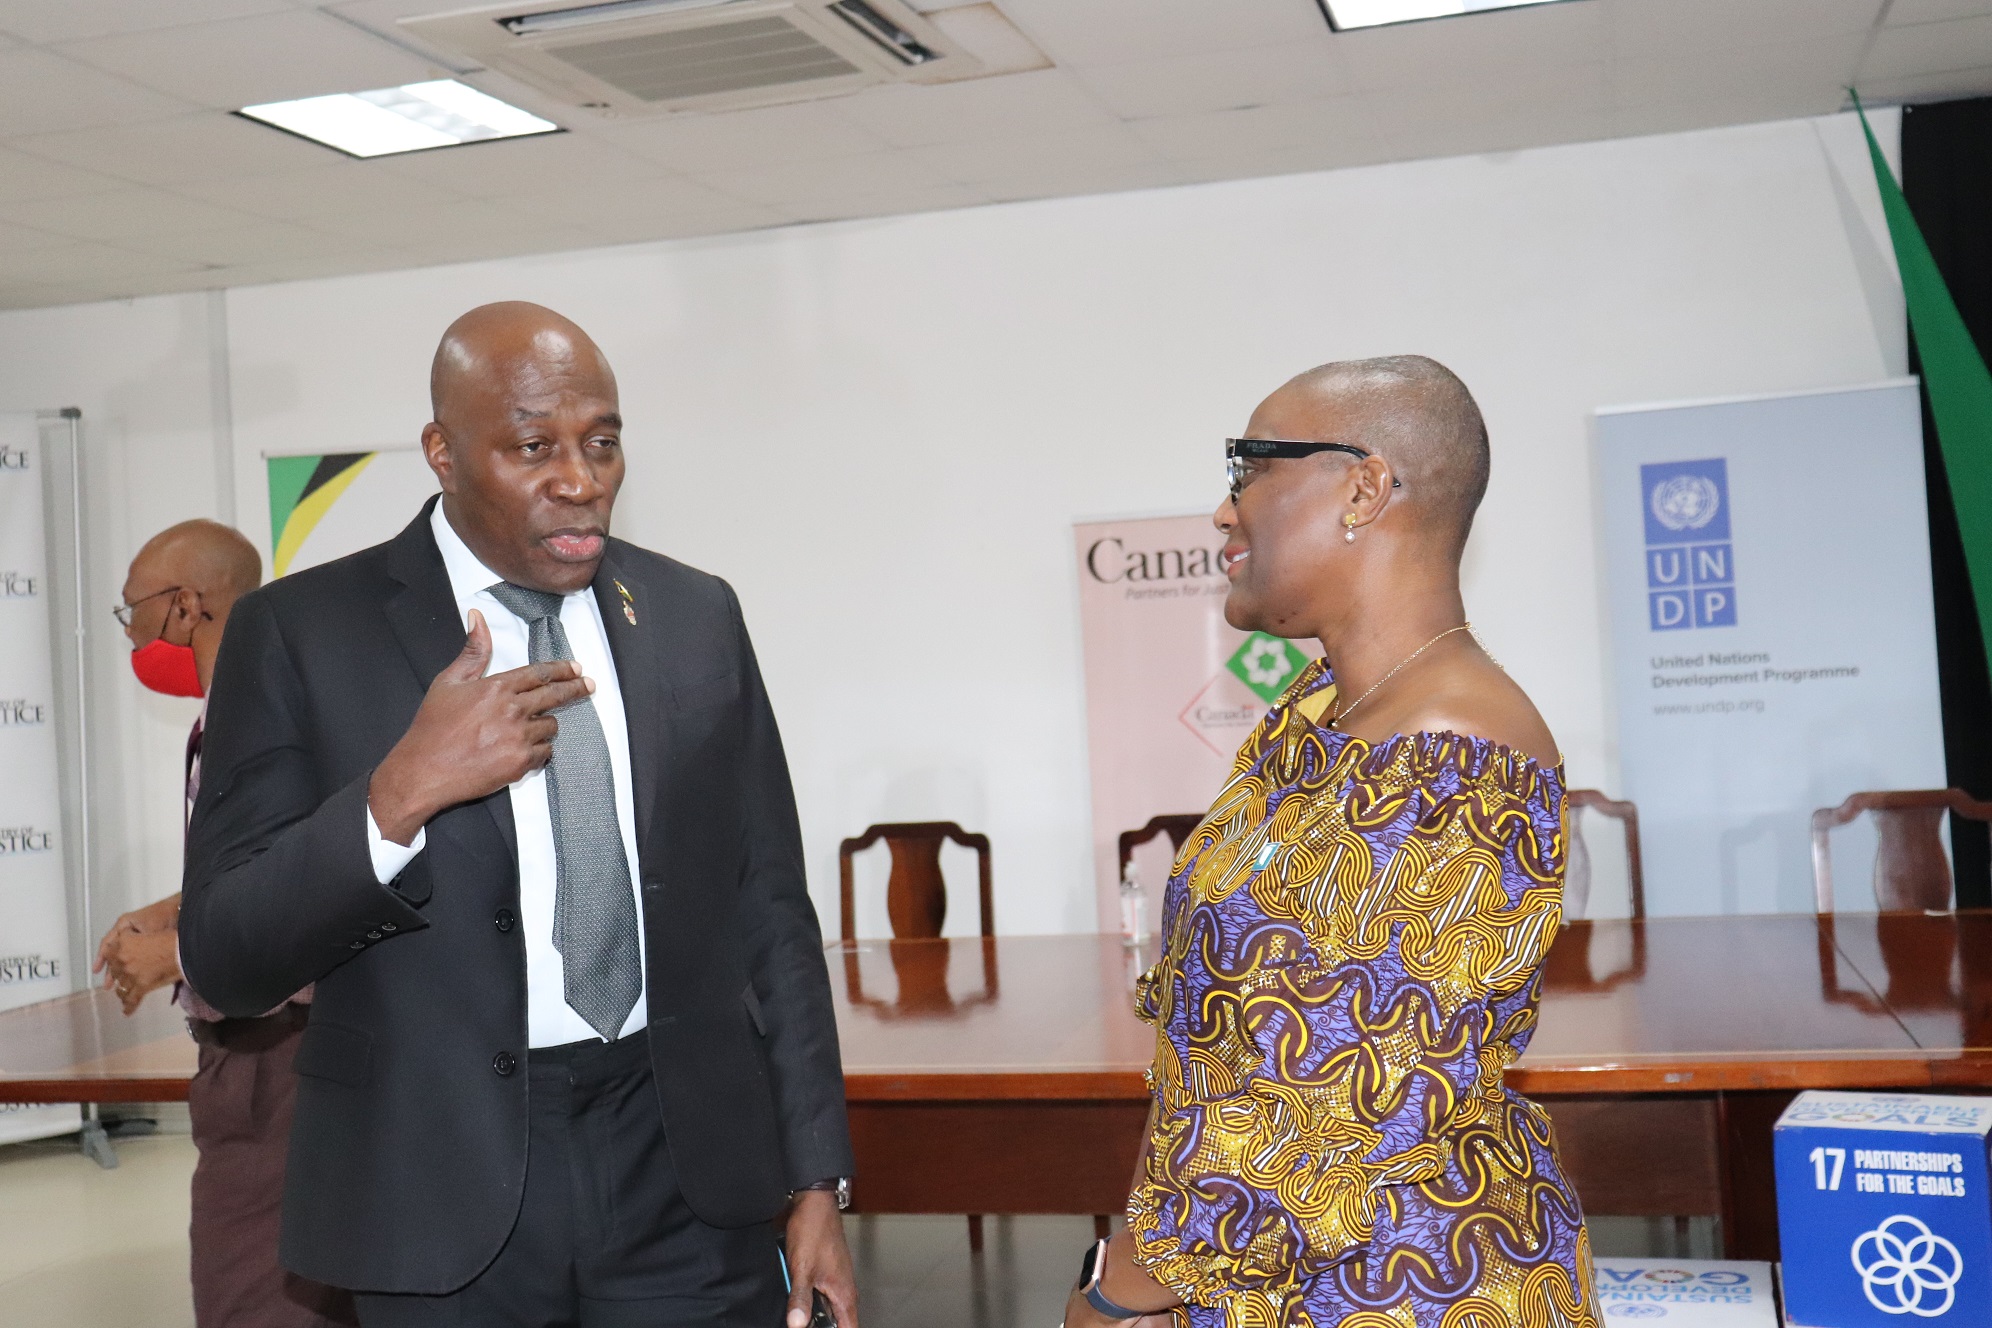 Chief Justice of Jamaica and UNDP Resident Representative in discussion